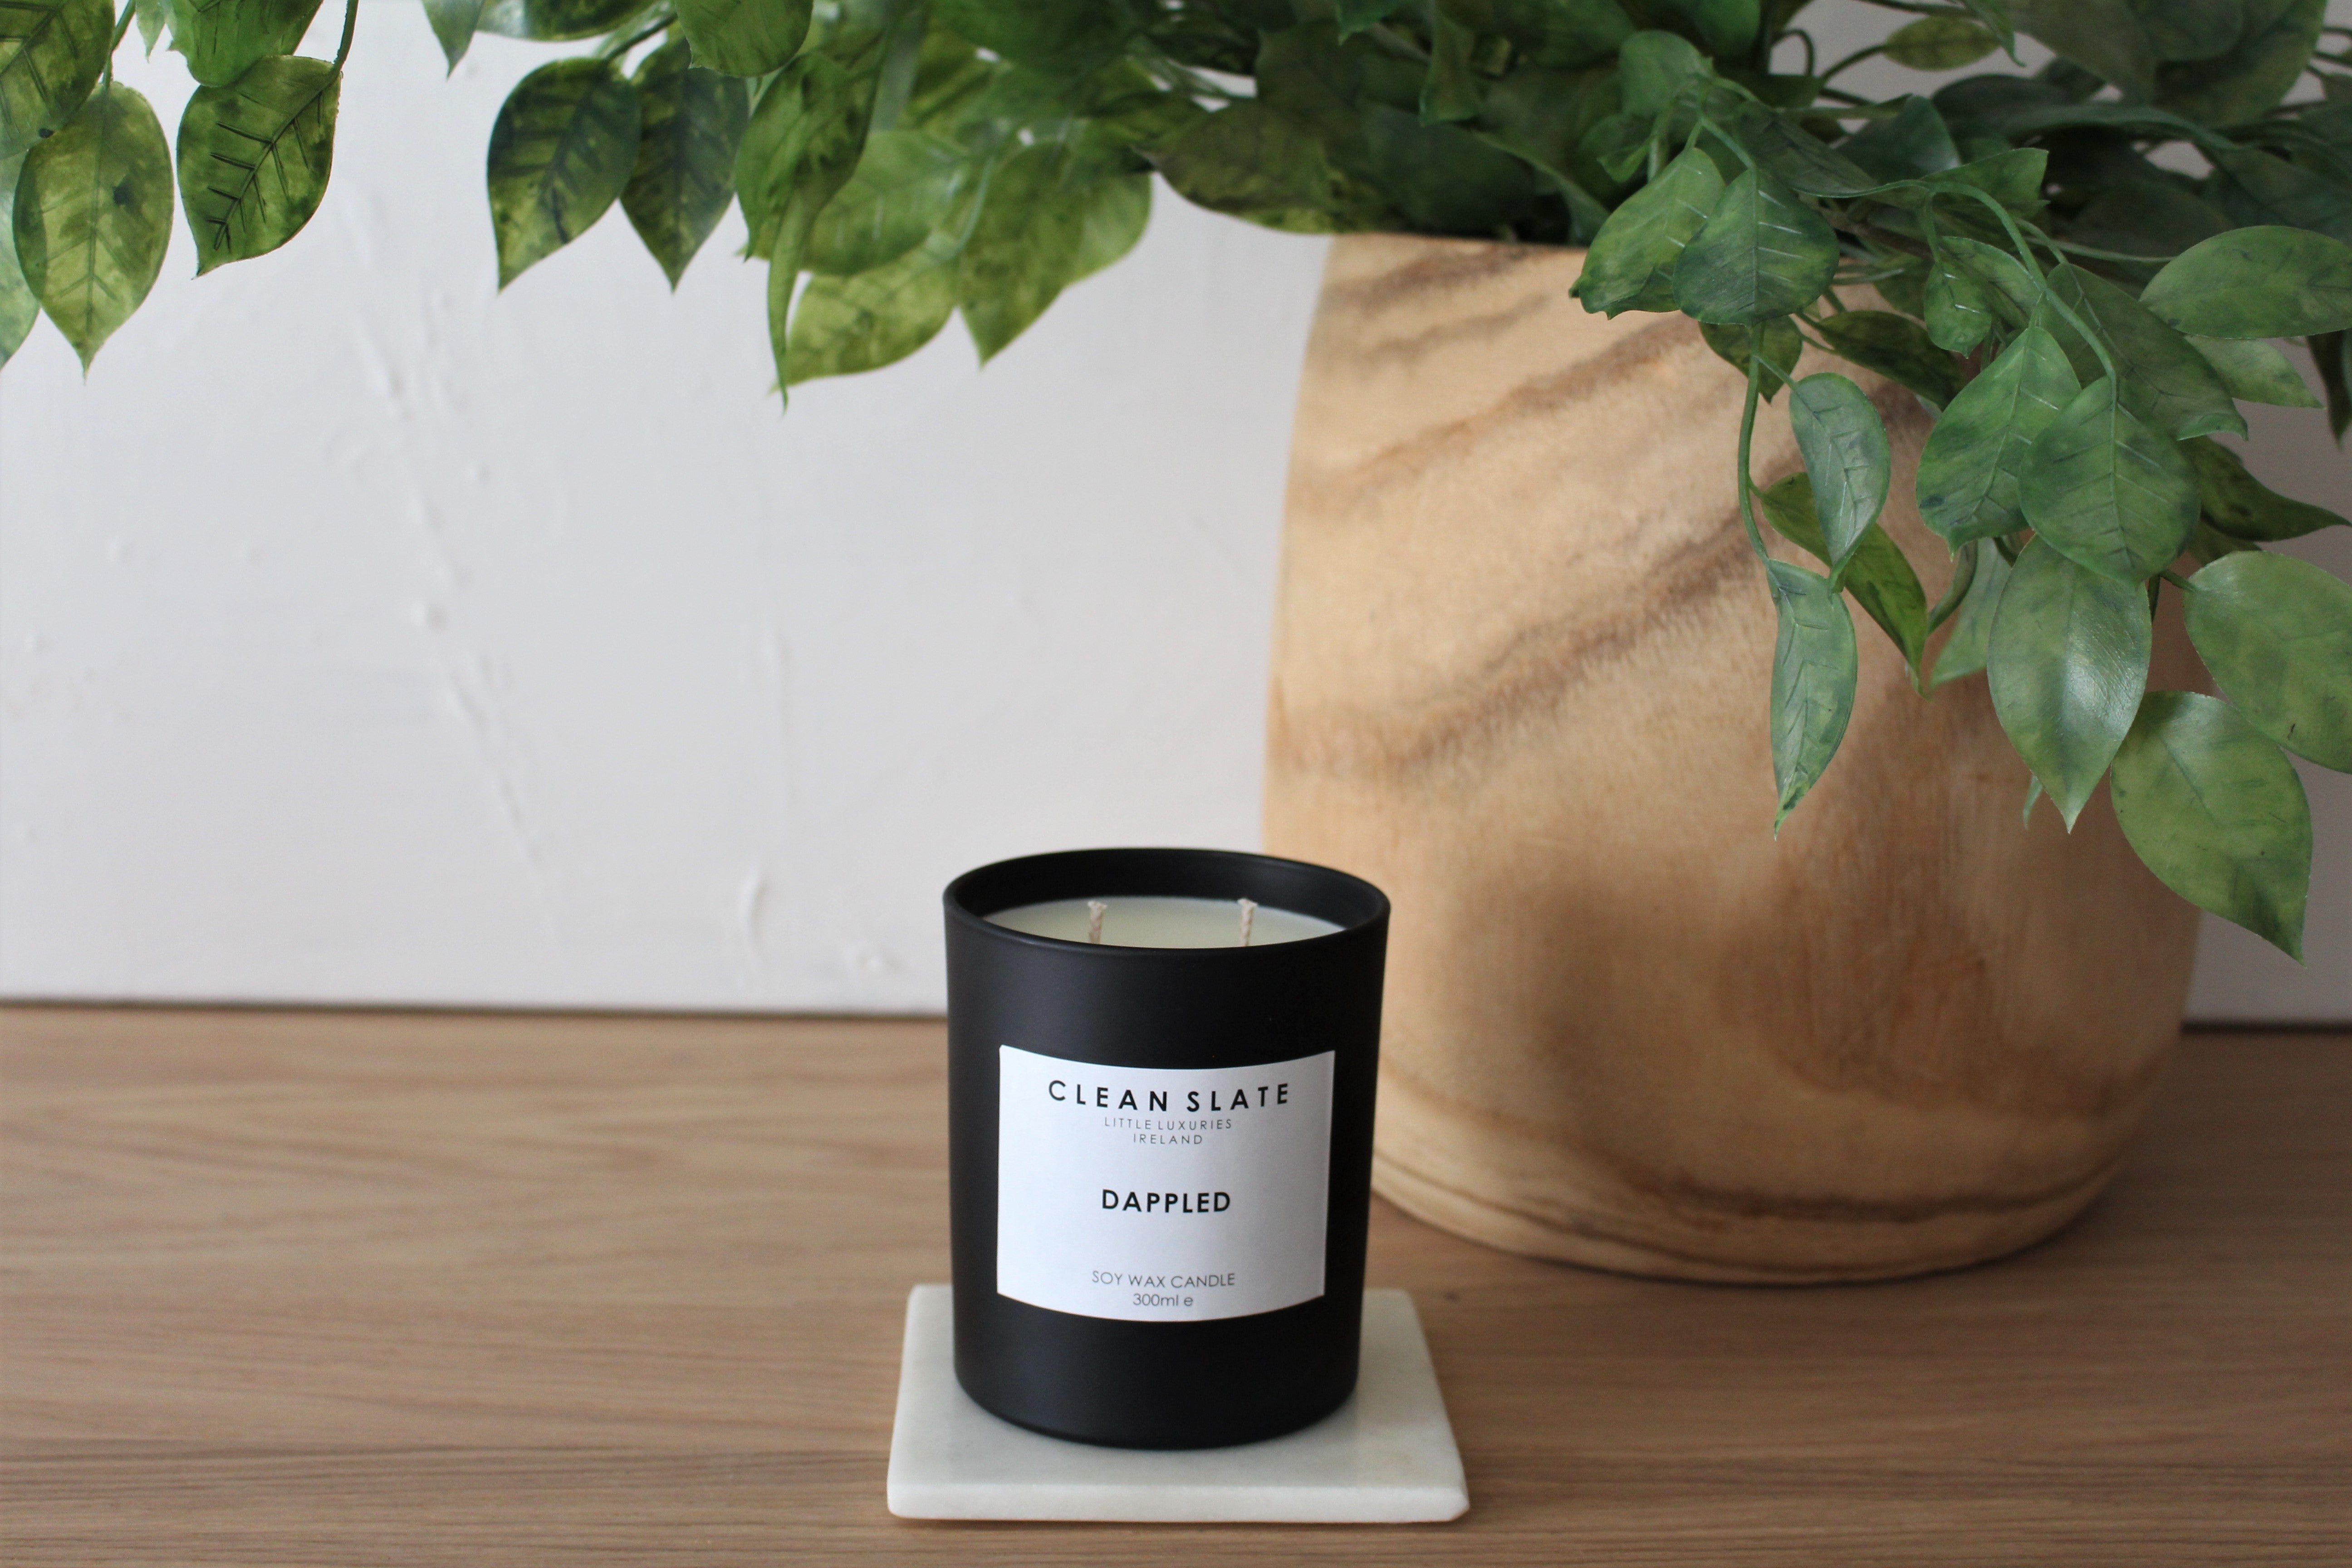 Dappled Noir Candle styled.